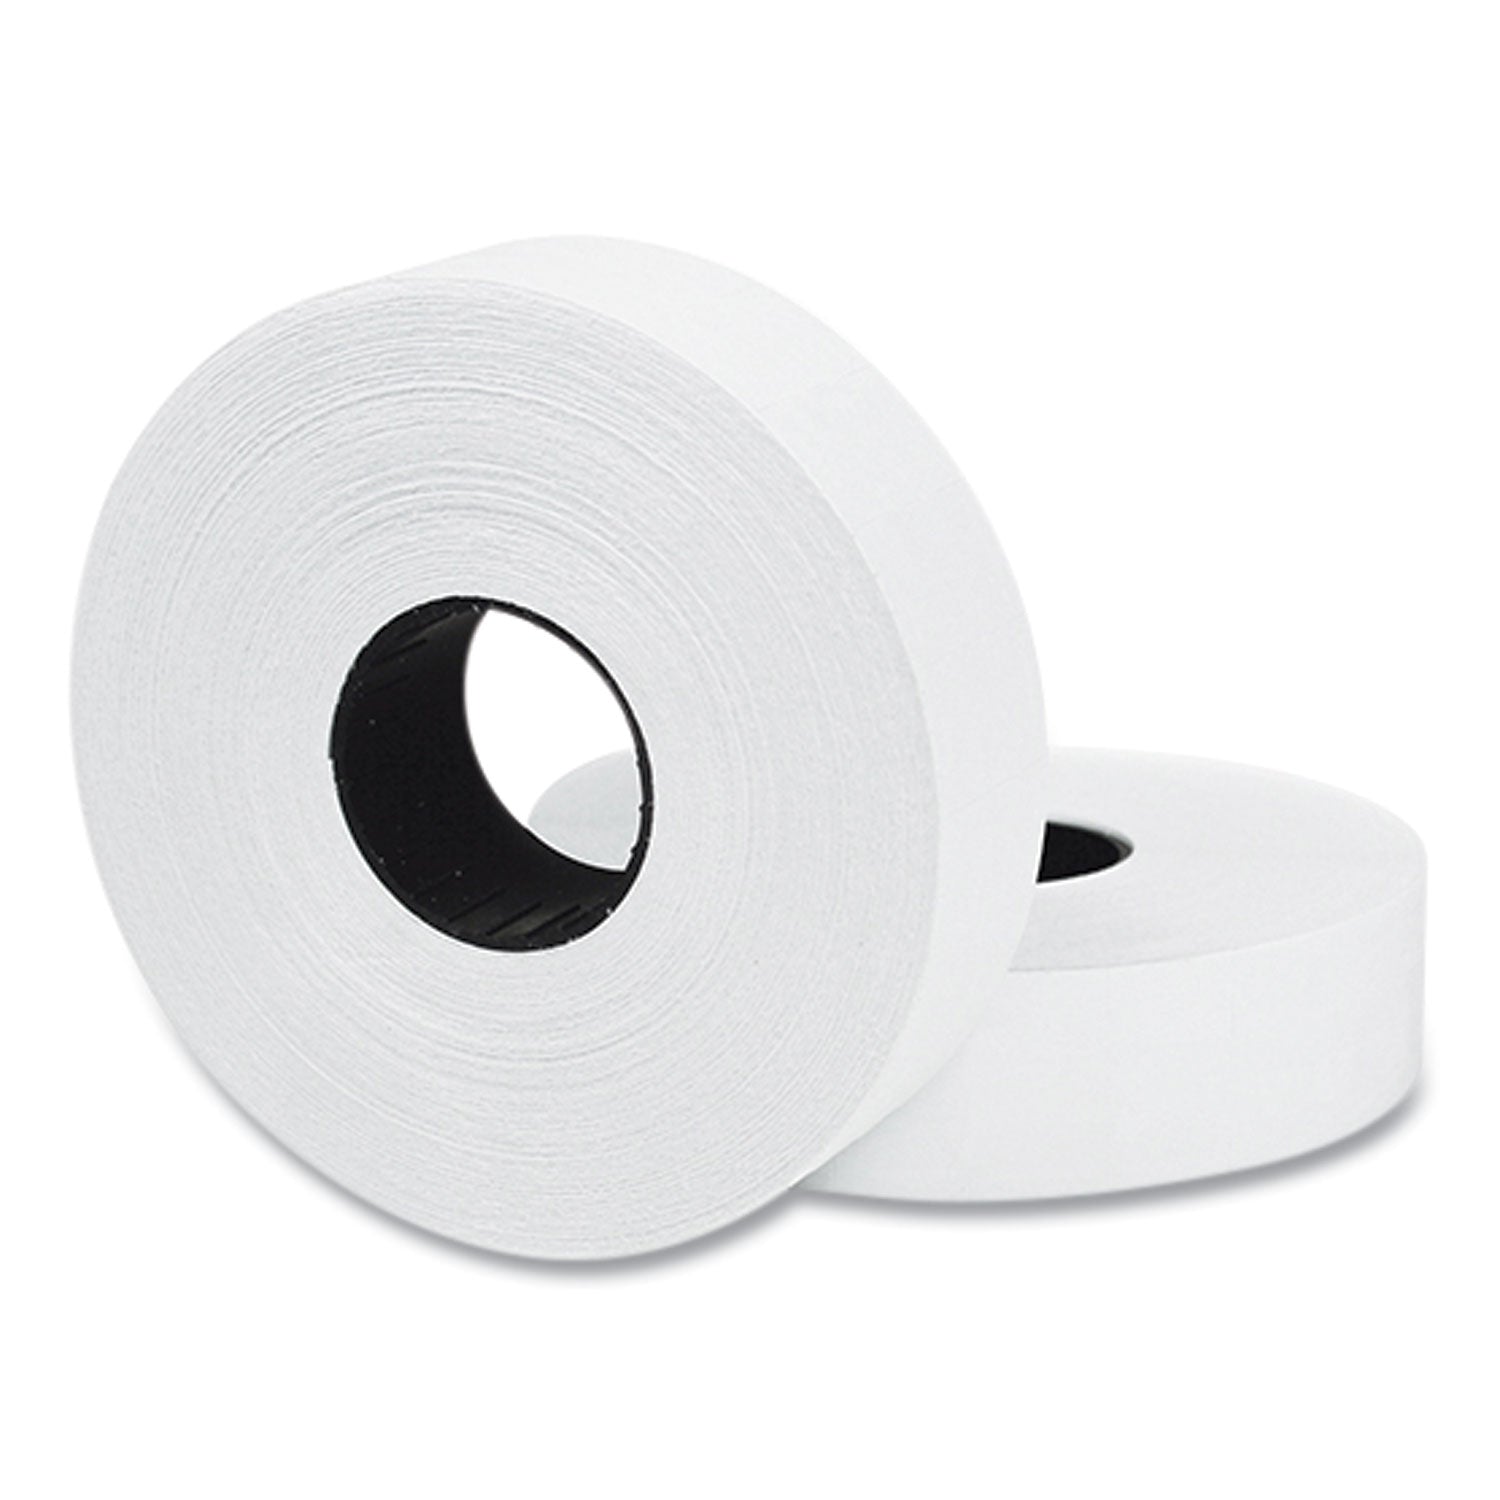 two-line-pricemarker-labels-white-1750-labels-roll-2-rolls-pack_grv098614 - 1